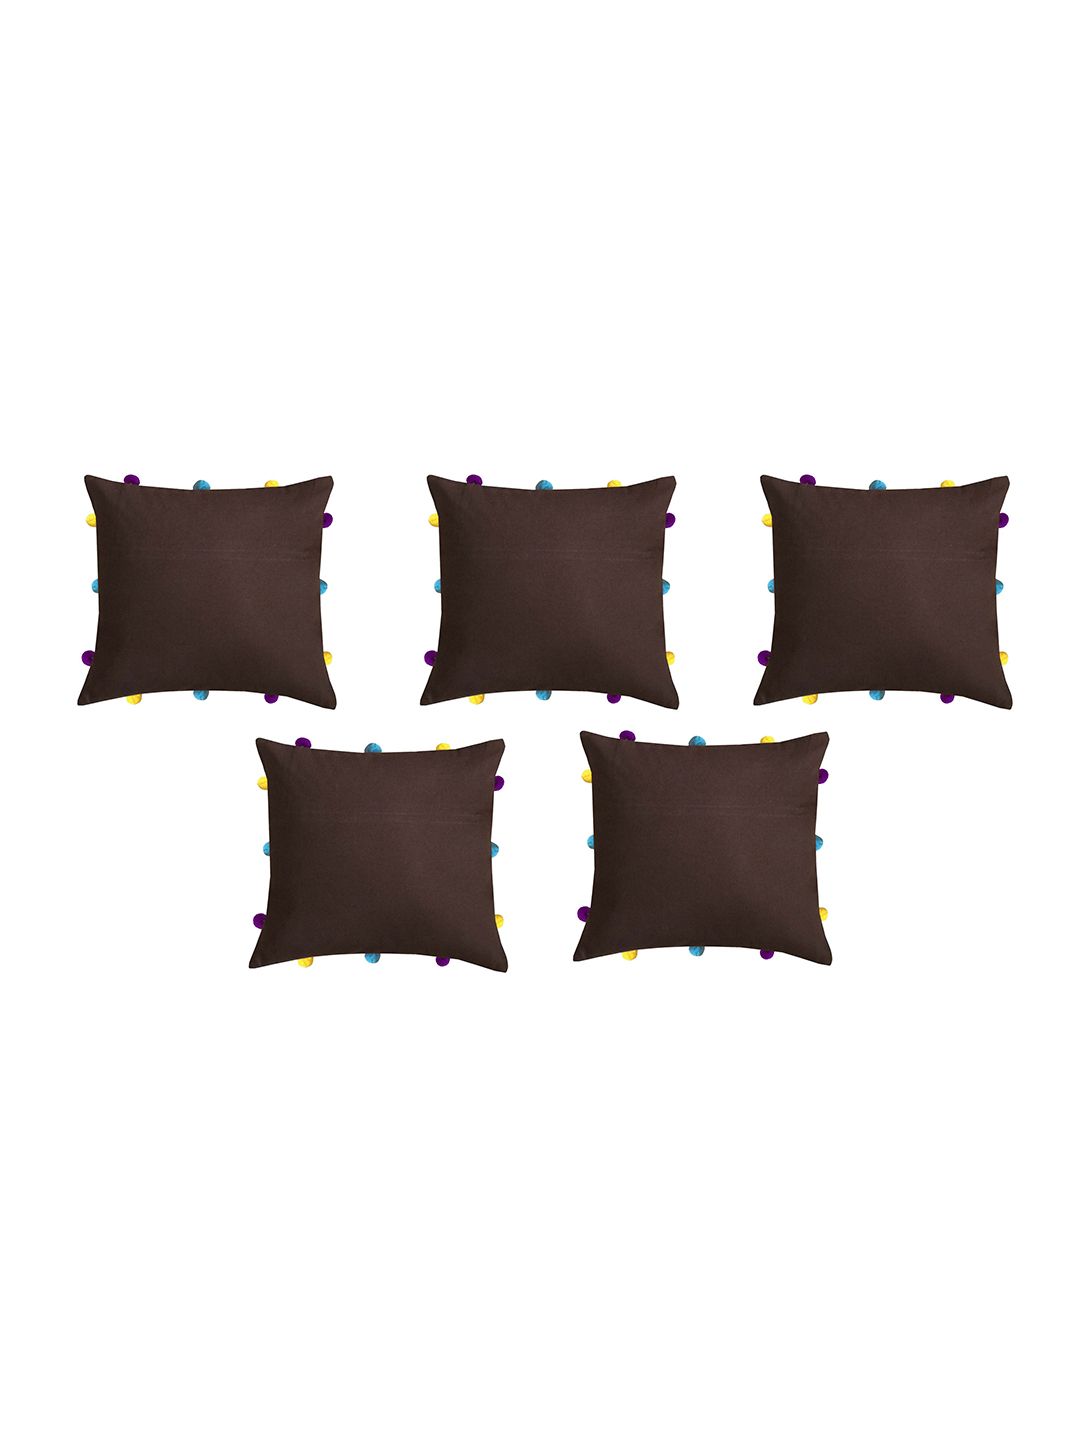 Lushomes Brown & Purple Set of 5 Square Cushion Covers Price in India